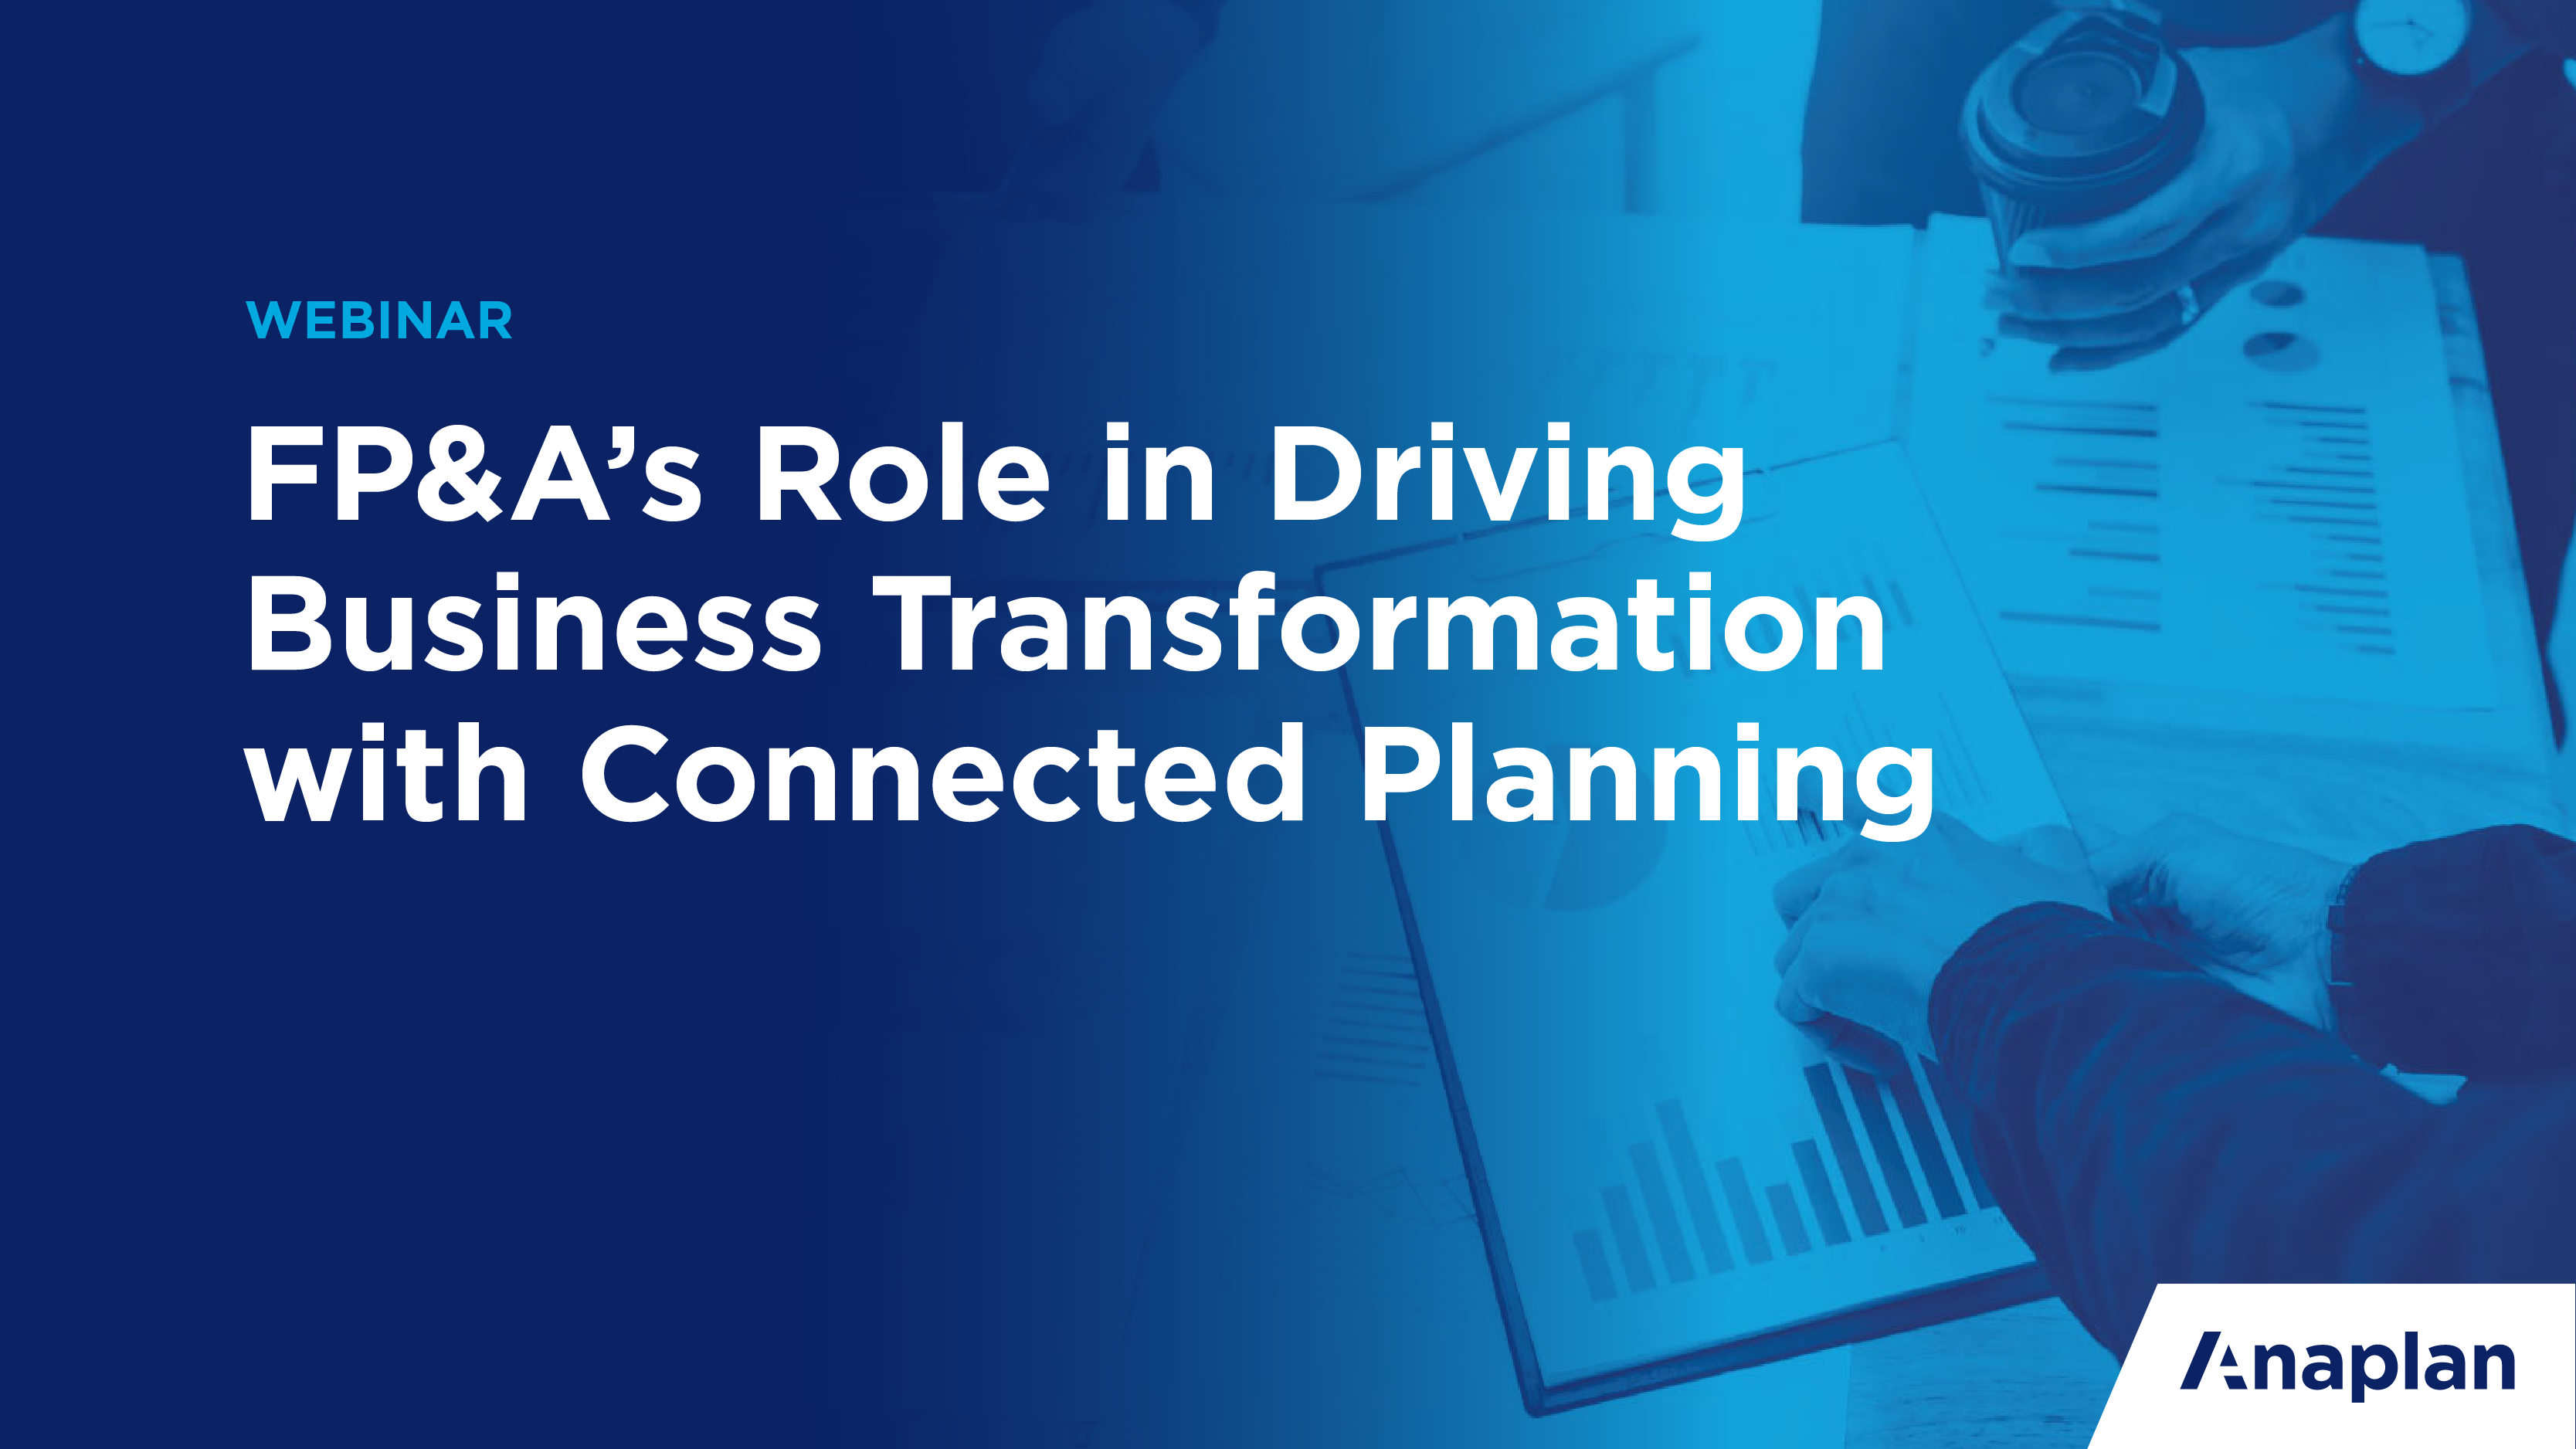 FP&A’s Role in Driving Business Transformation with Connected Planning